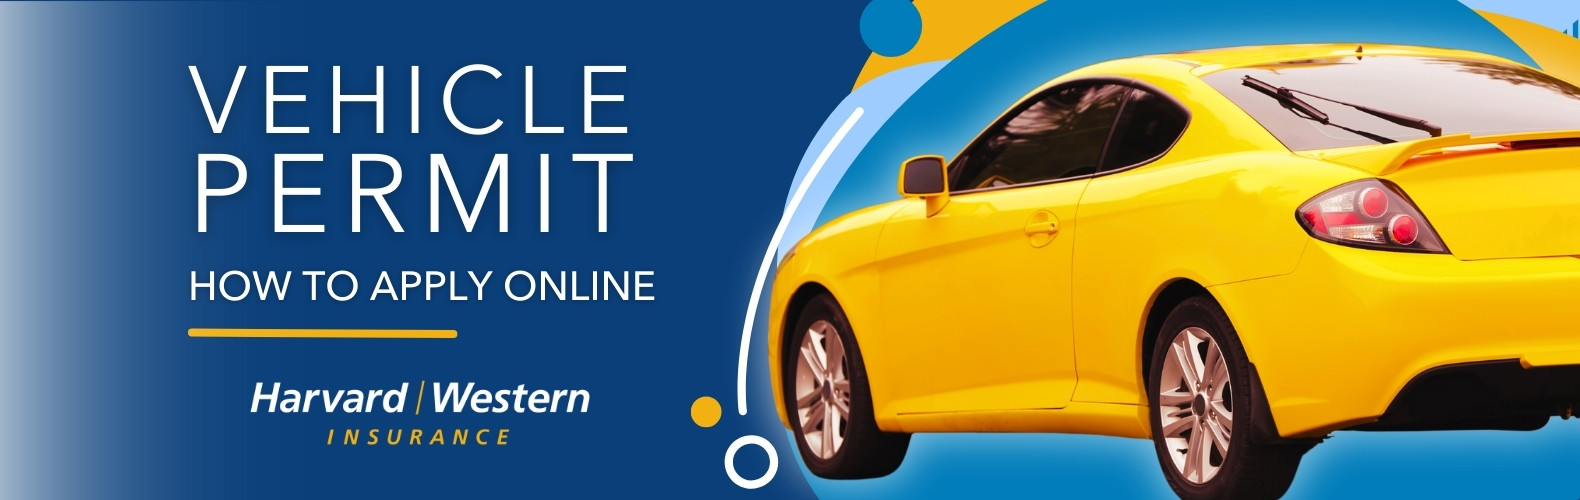 vehicle permit how to apply online blog image with yellow car